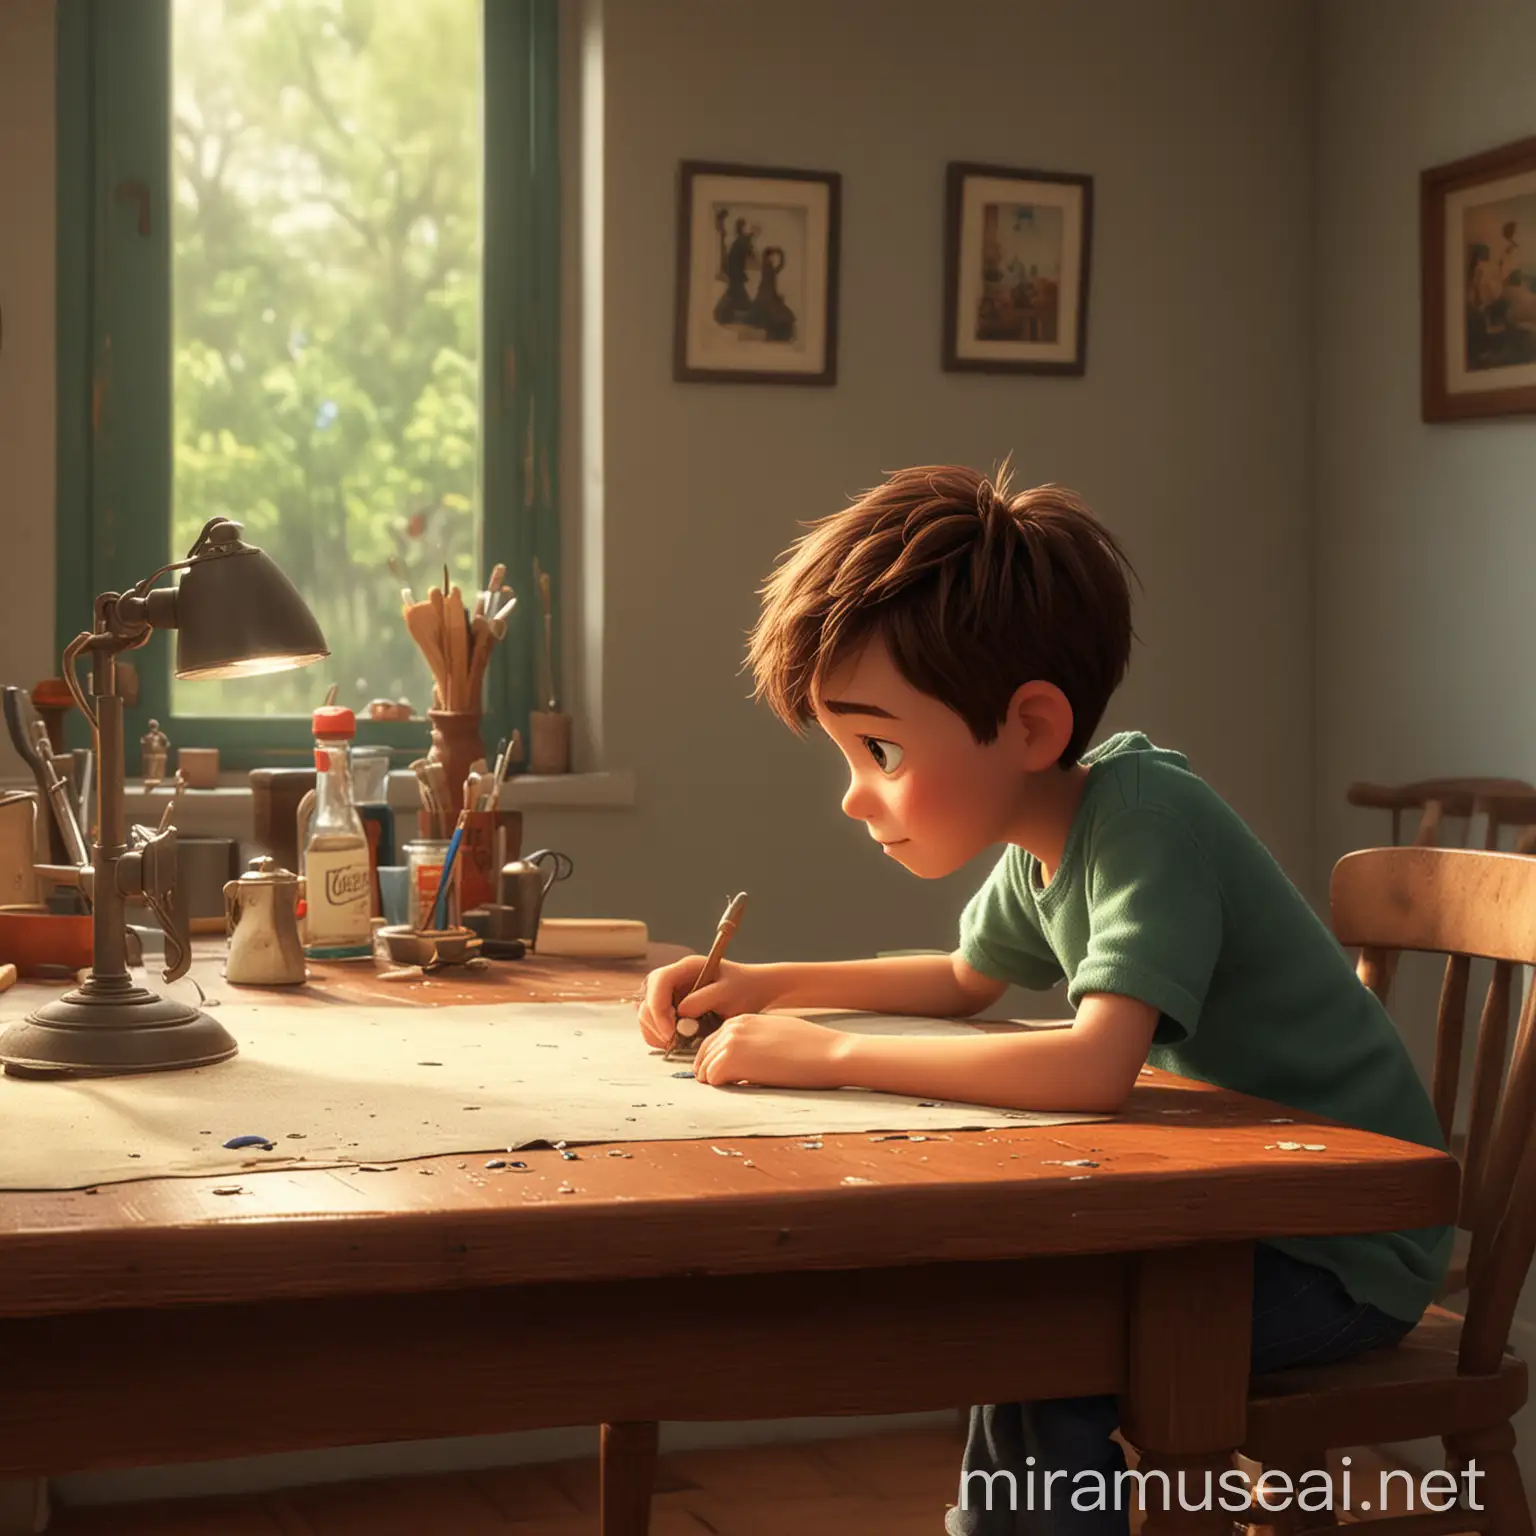 Young Boy Cleaning Table in Meticulous Pixar Style